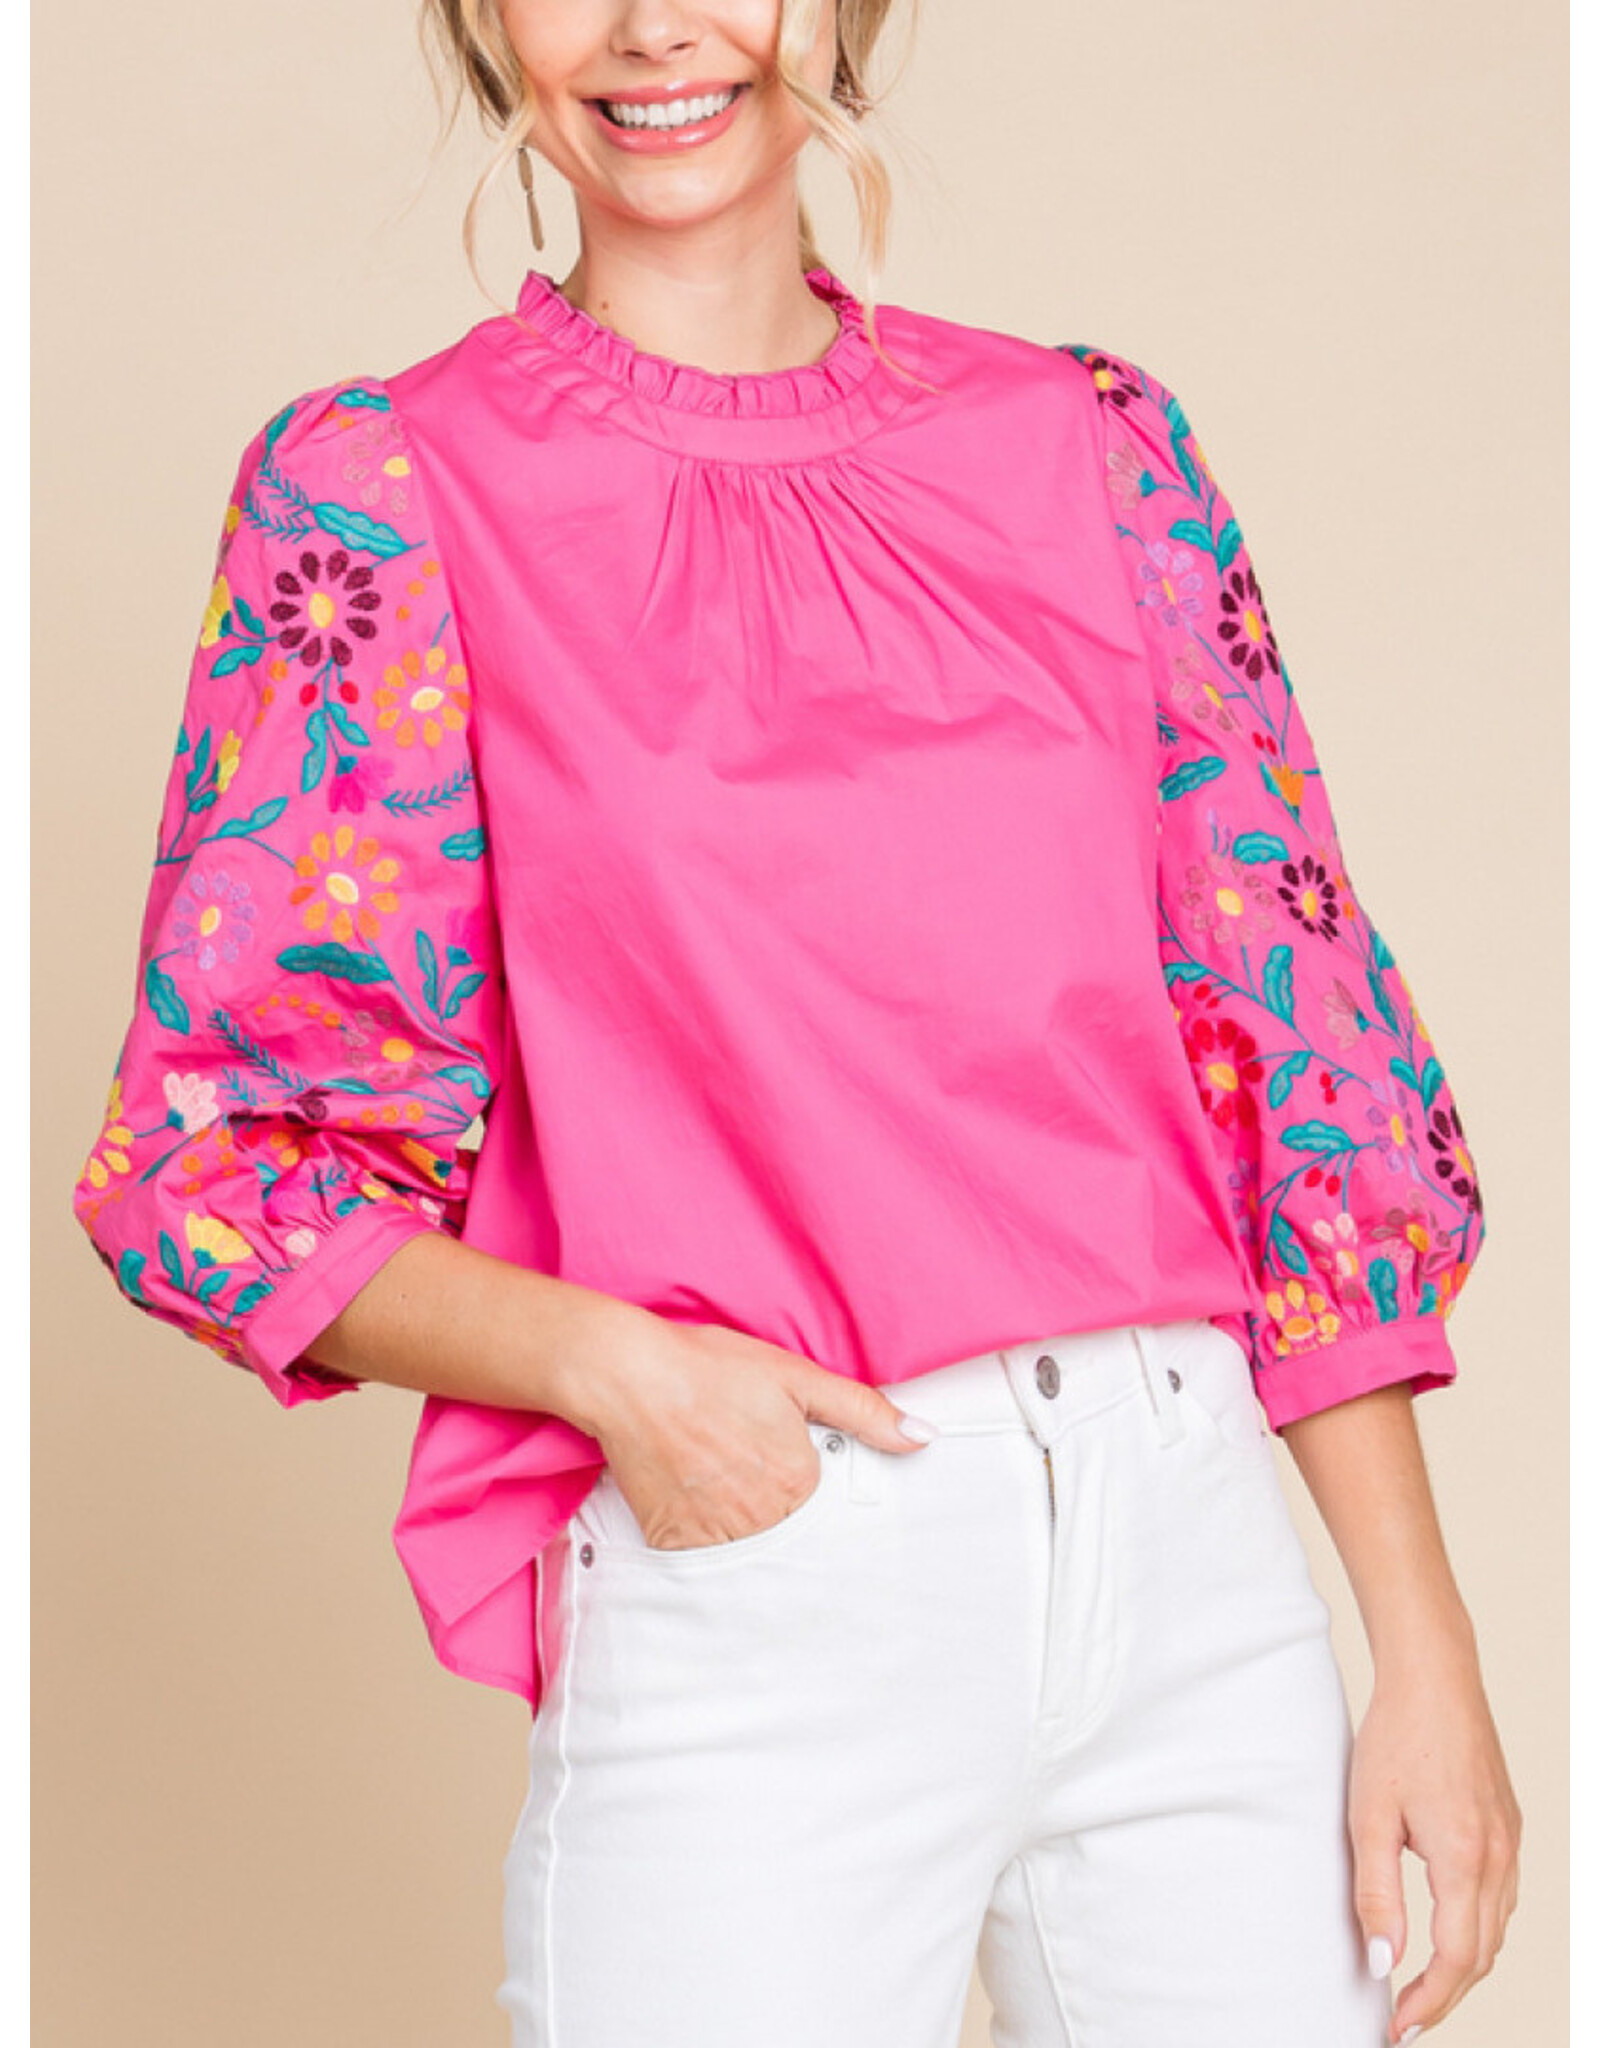 Ambrosia 3/4 Embroidered Sleeve Top